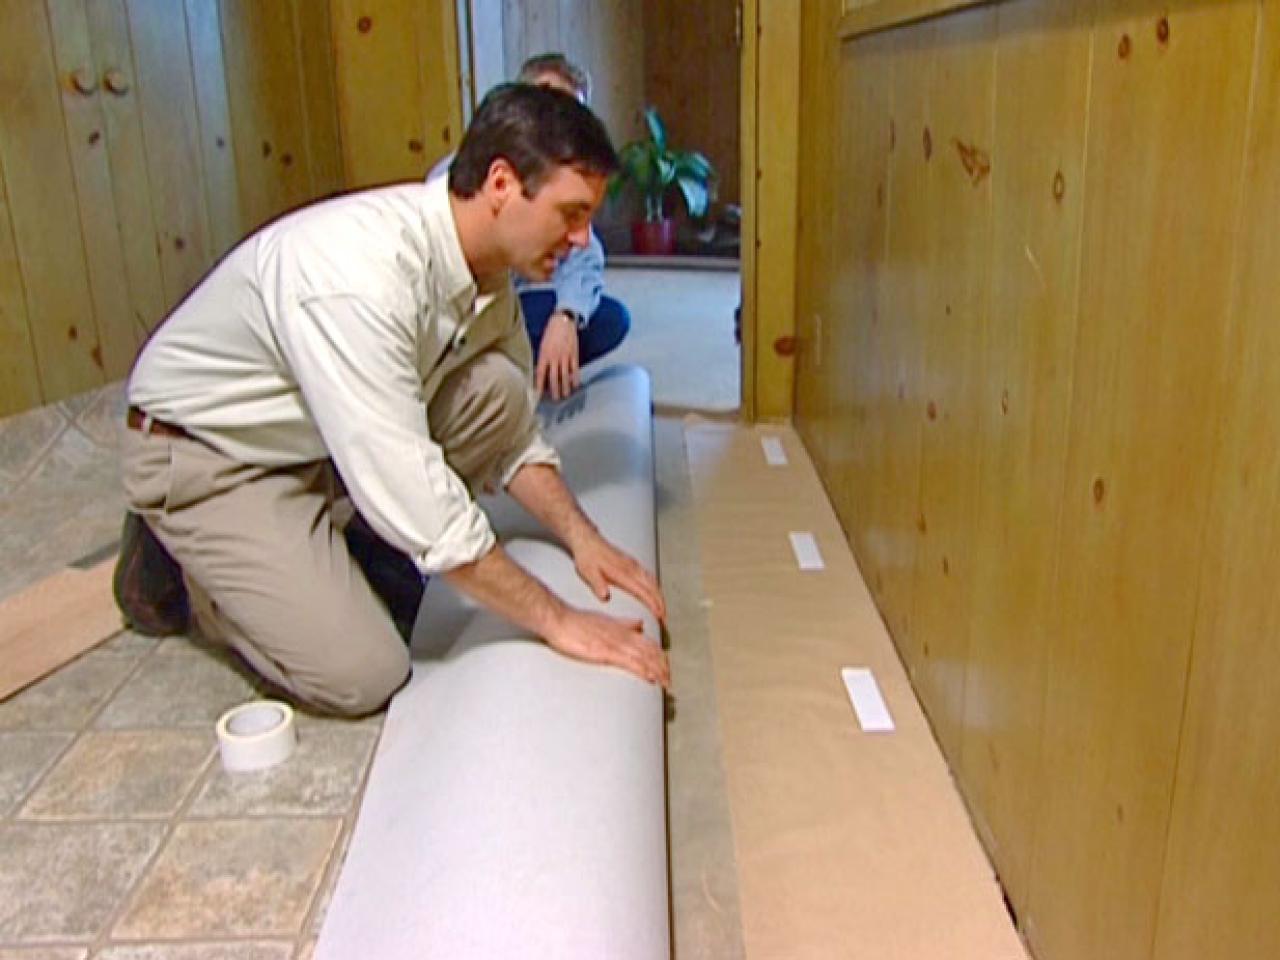 How To Install Vinyl Flooring Tos, How To Measure For Sheet Vinyl Flooring